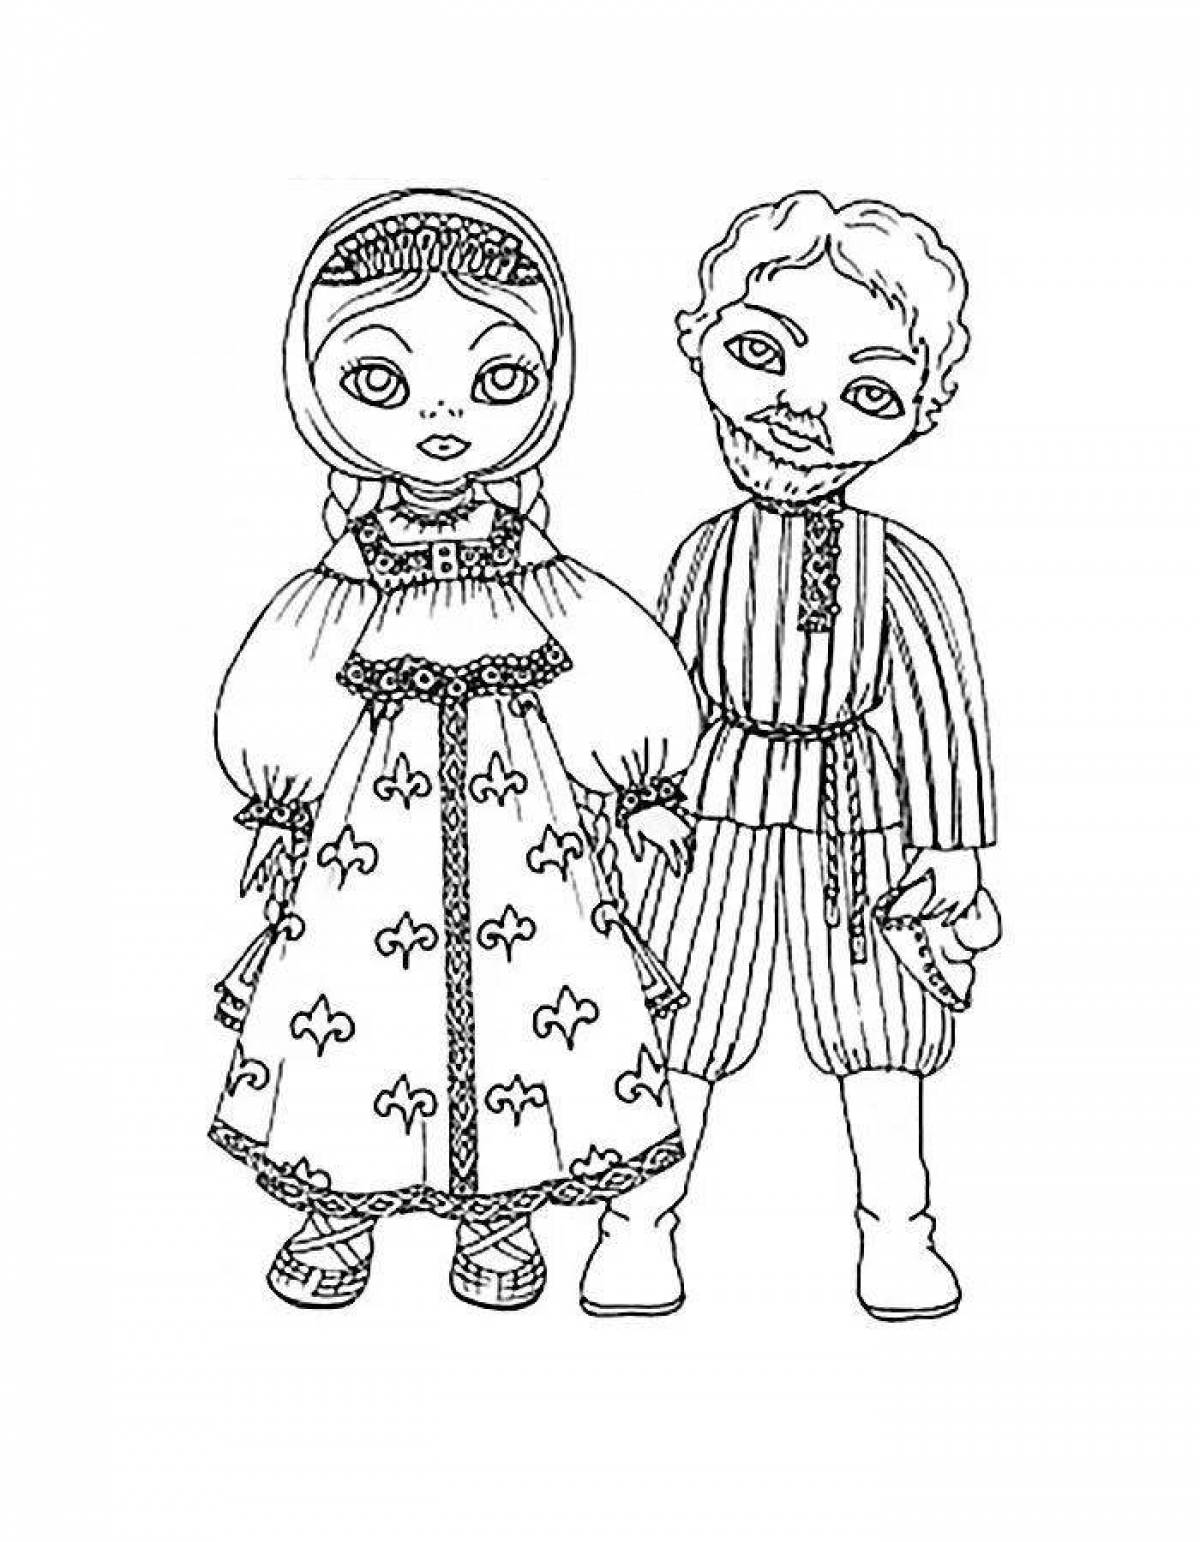 Decorative costumes of Russian people